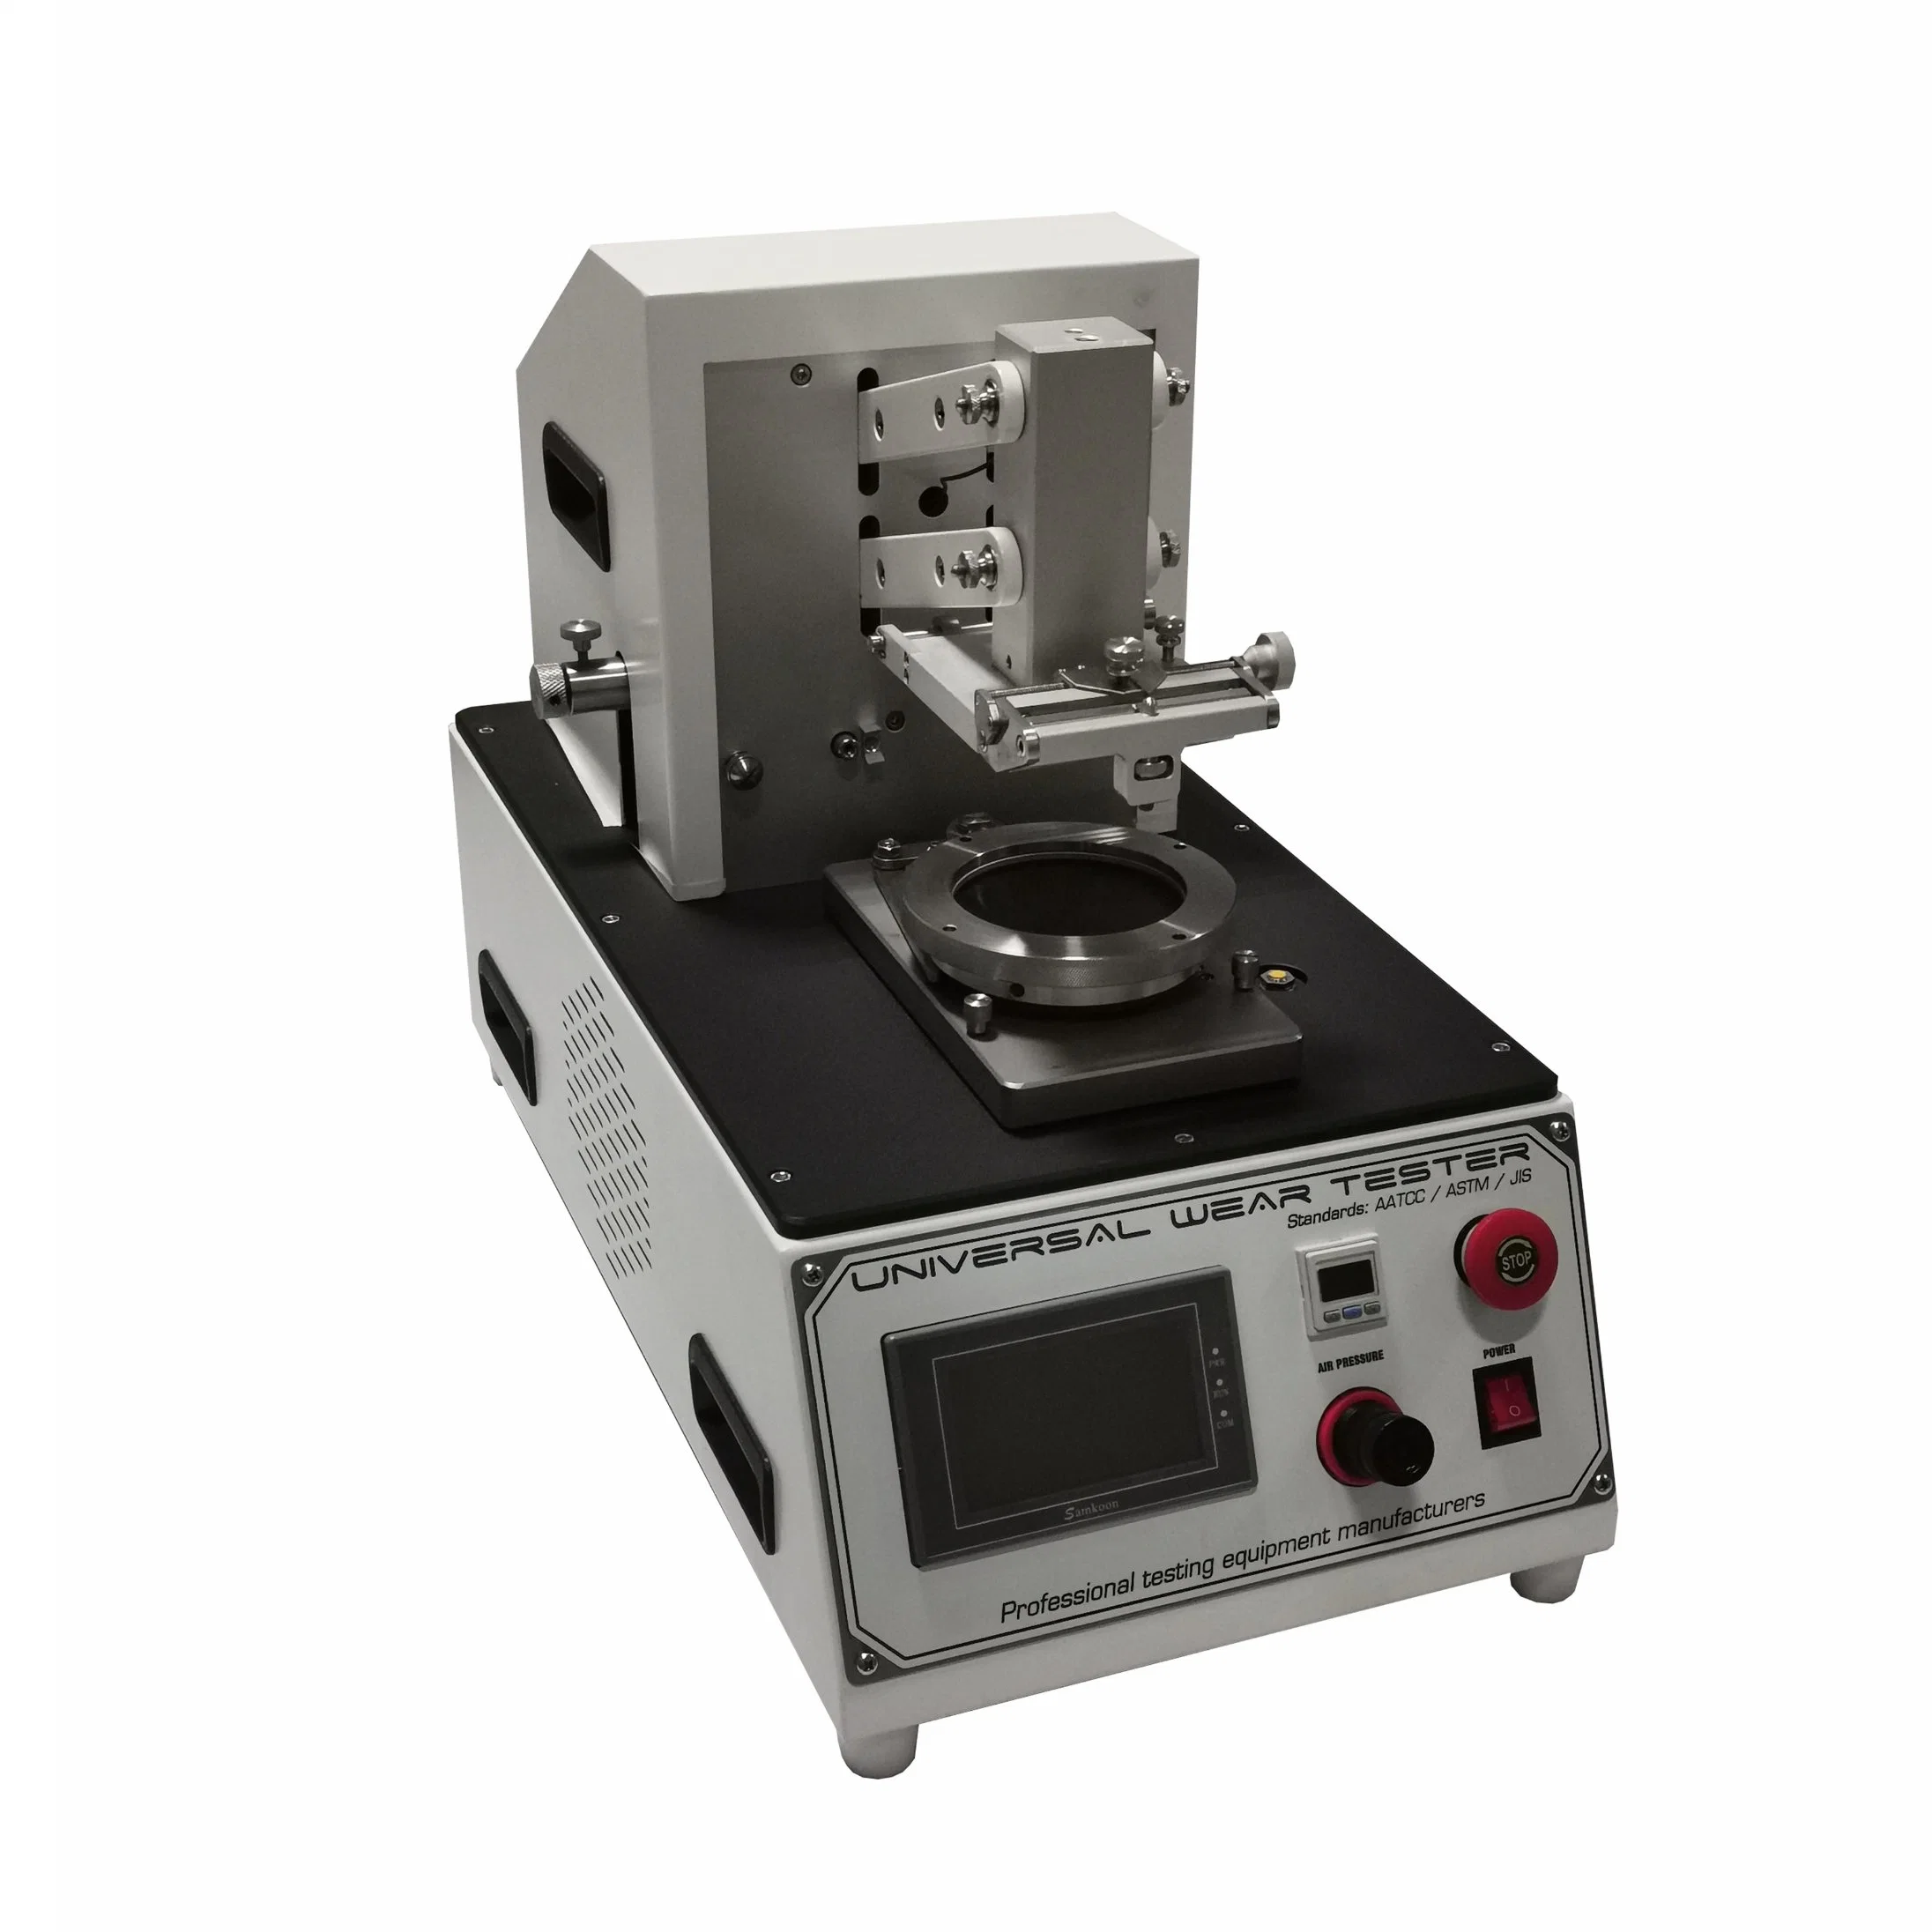 Universal Wear and Abrasion Lab Testing Instrument for Footwear and Industrial Textiles Fabrics (XD-B19)